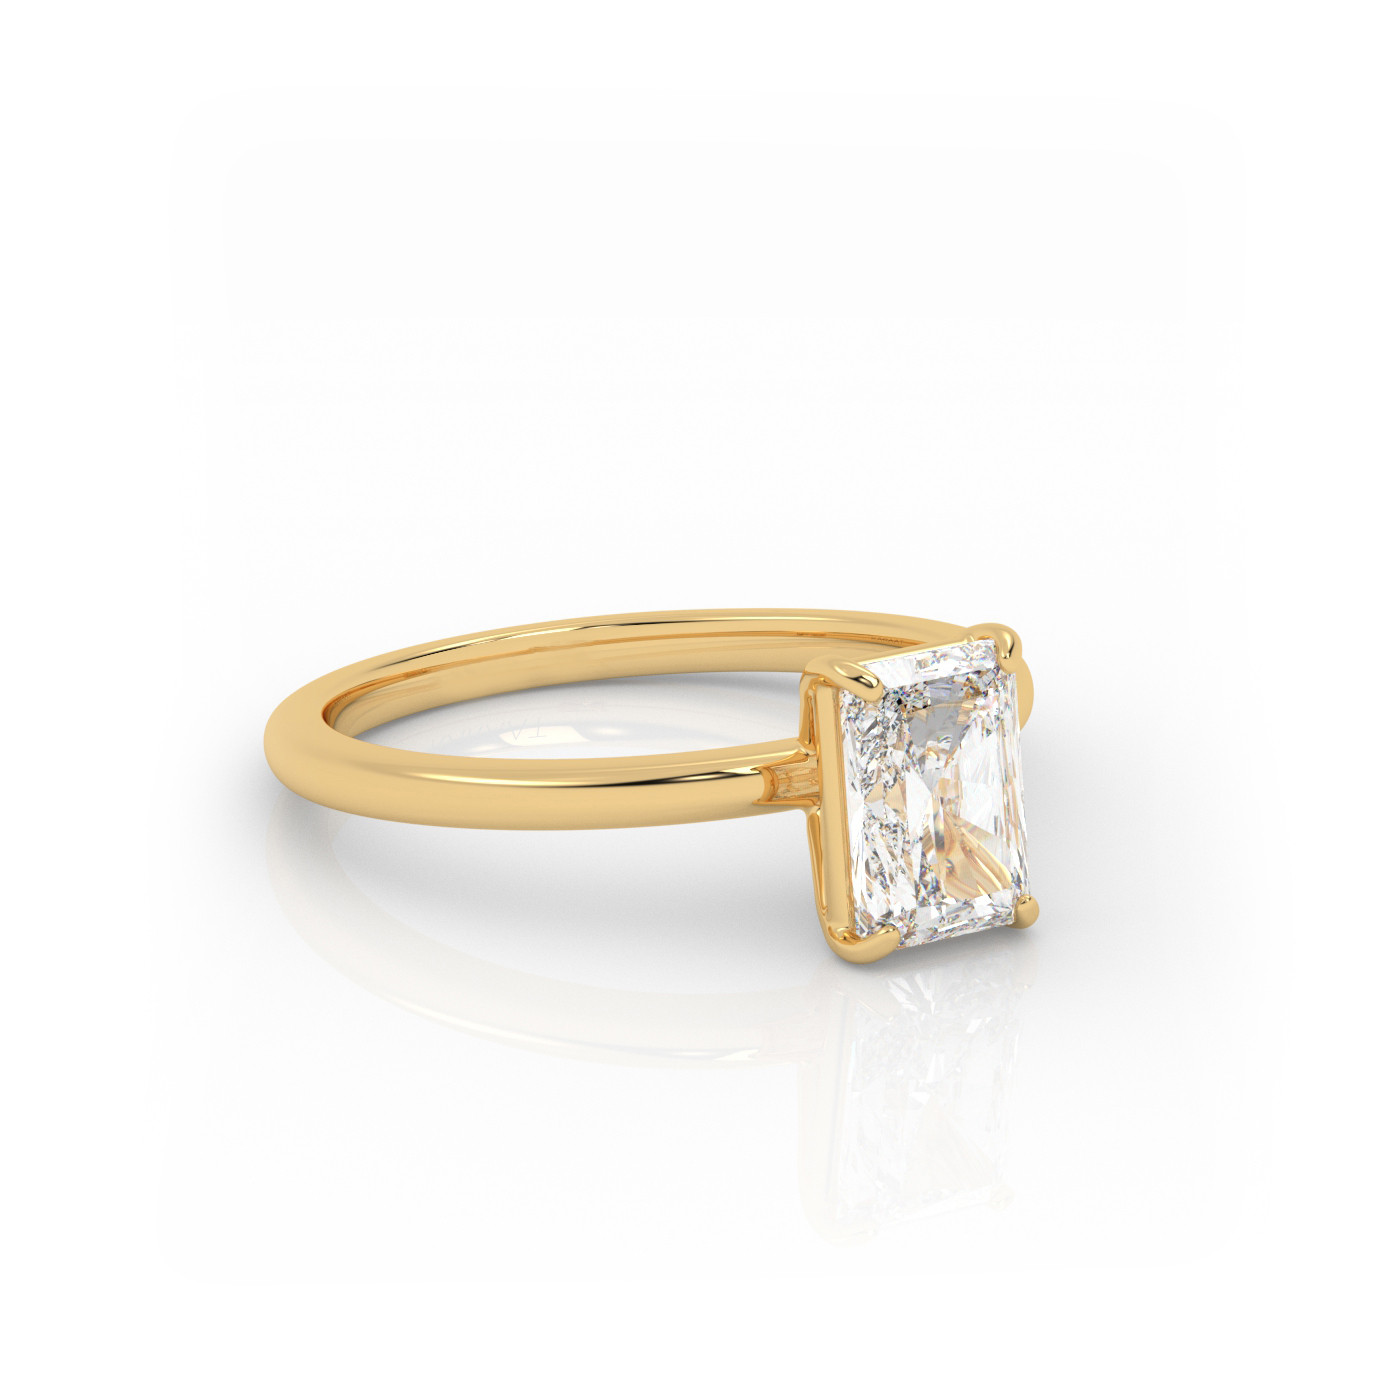 18K YELLOW GOLD Radiant Diamond Cut Solitaire Engagement Ring